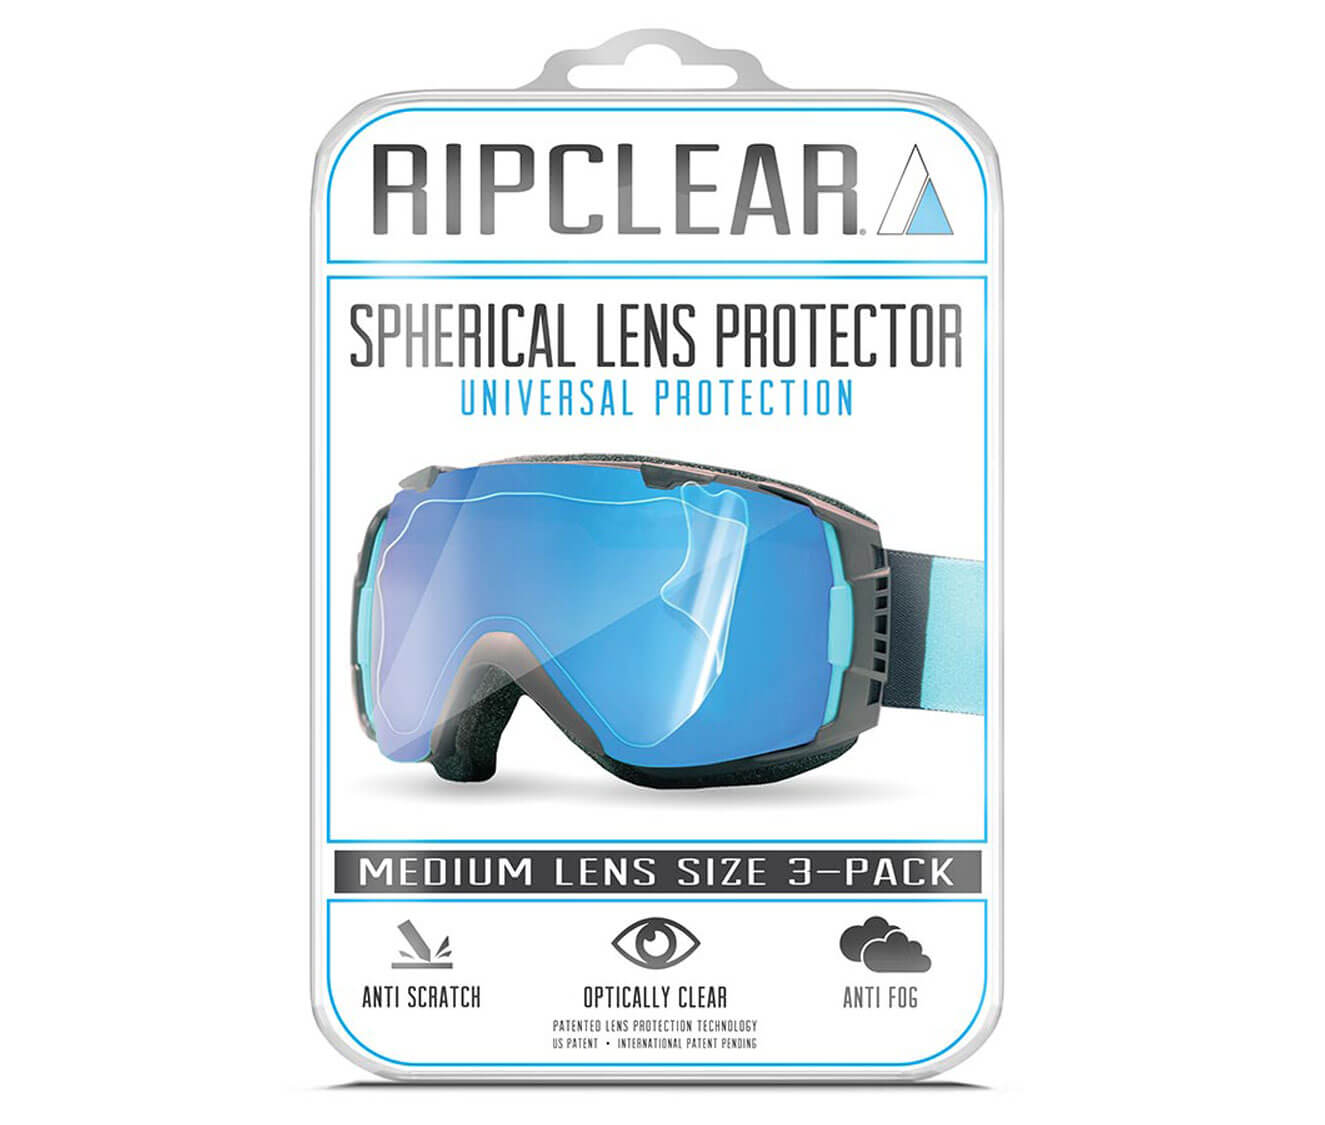 Ripclear Spherical Universal Medium Snow Goggle Lens Protector - 3 Pack